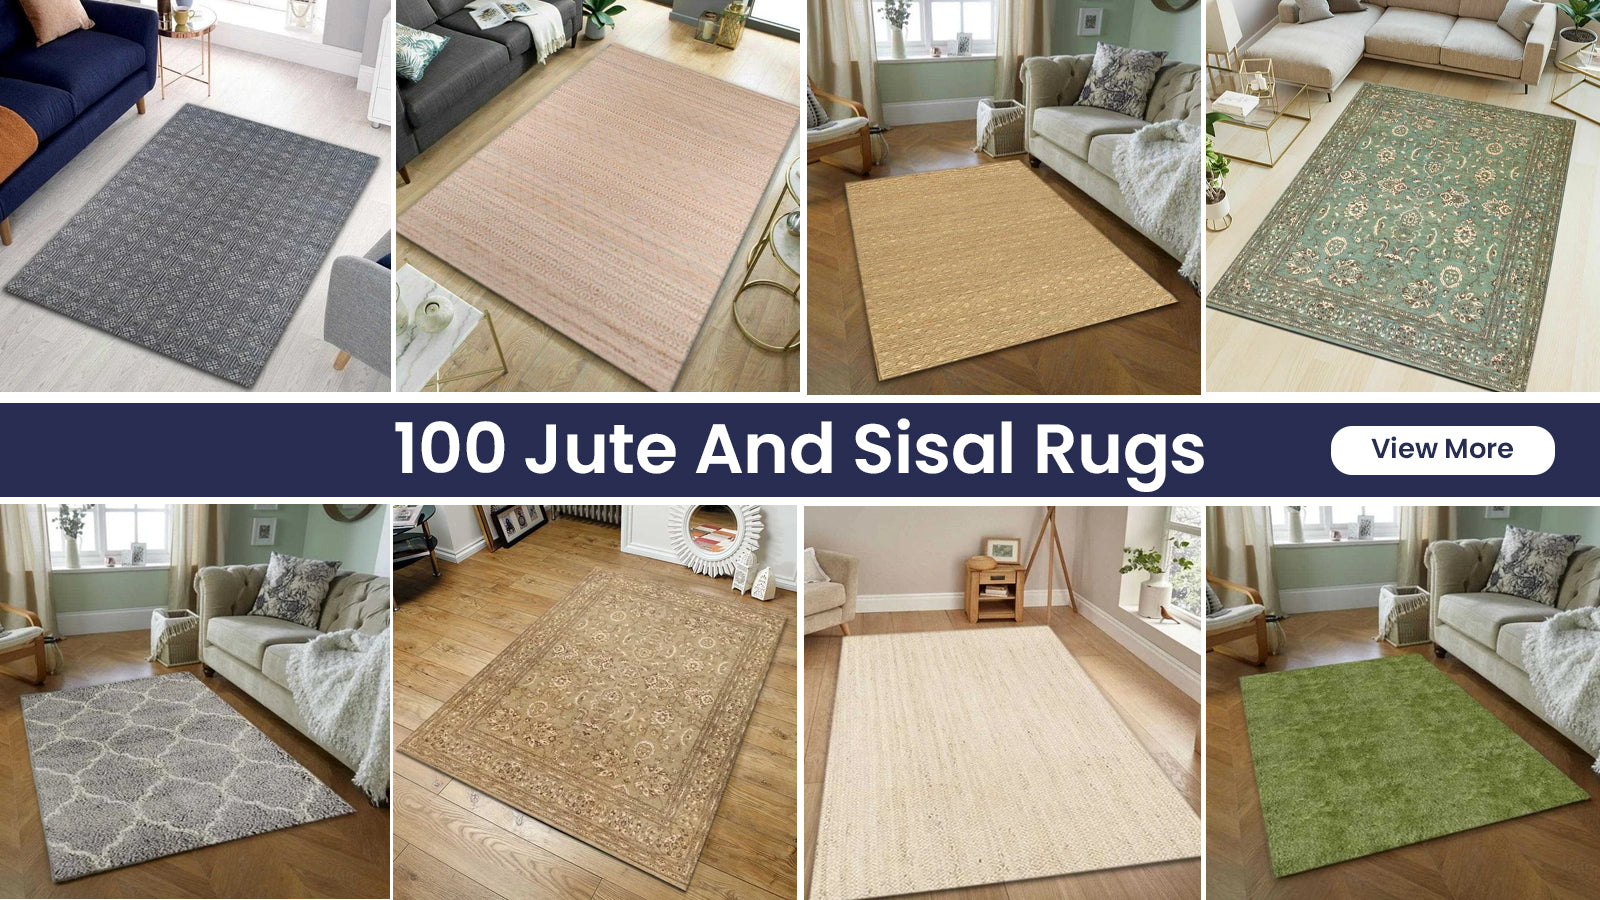 How to Clean Every Type of Rug, From Wool to Jute